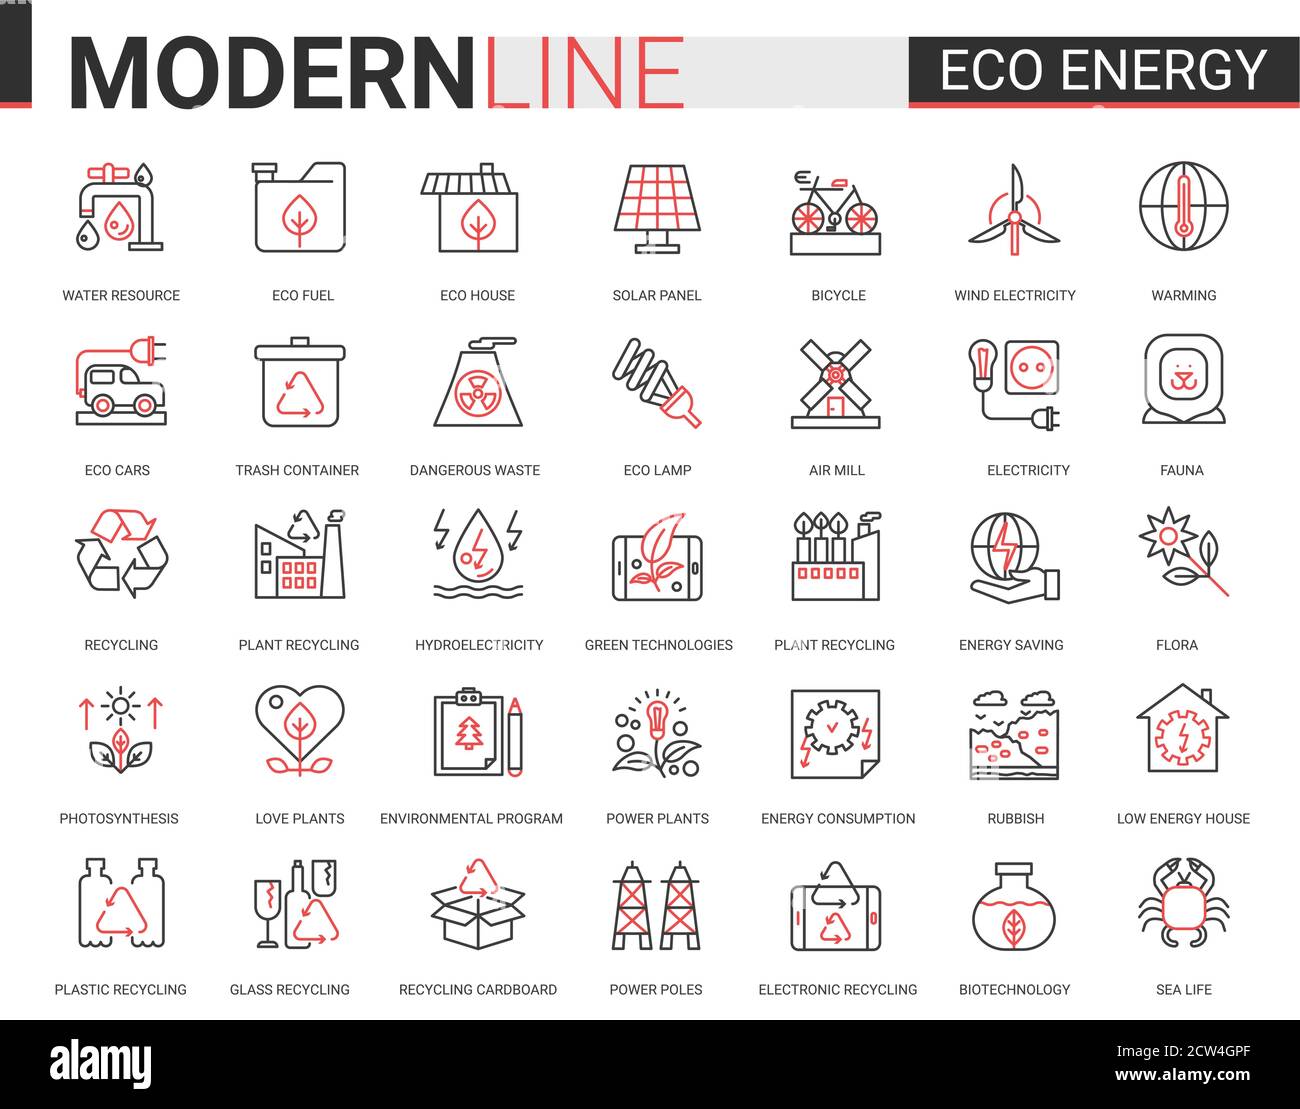 Eco energy flat icon vector illustration set. Red black thin line website design collection of ecology problems linear symbols, environmental ecosystem protection and green waste recycling technology Stock Vector